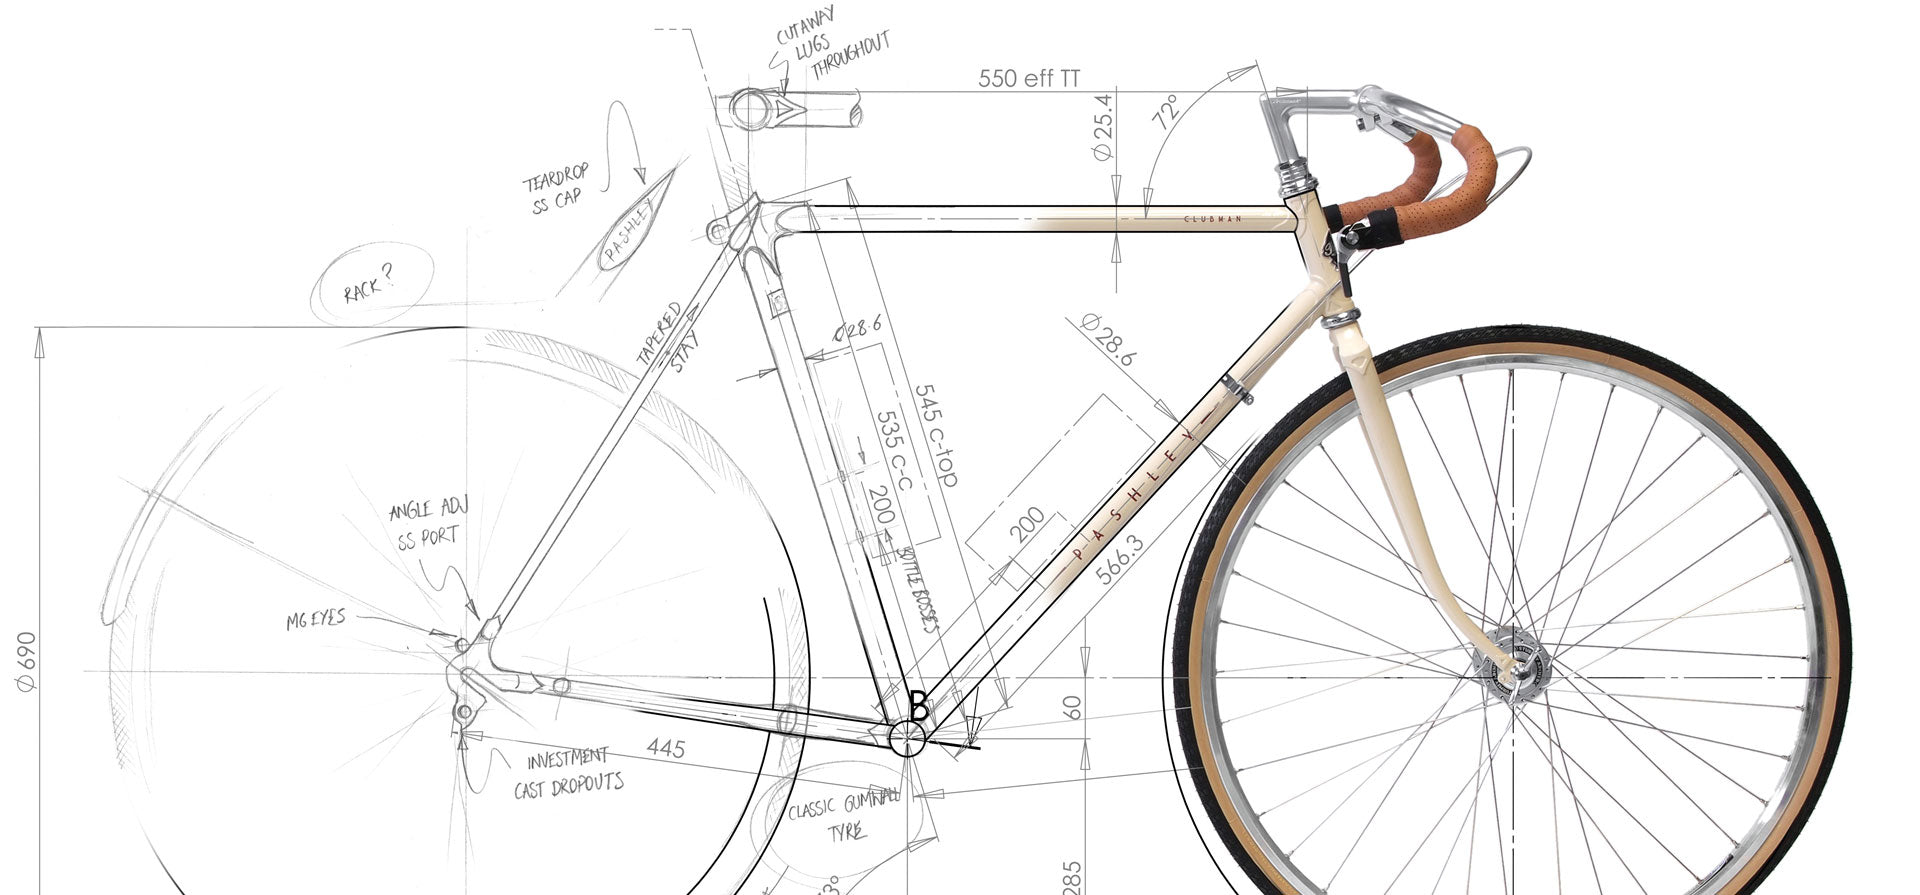 Part sketch dimensional drawing, part photo of the Pashley Clubman bicycle.